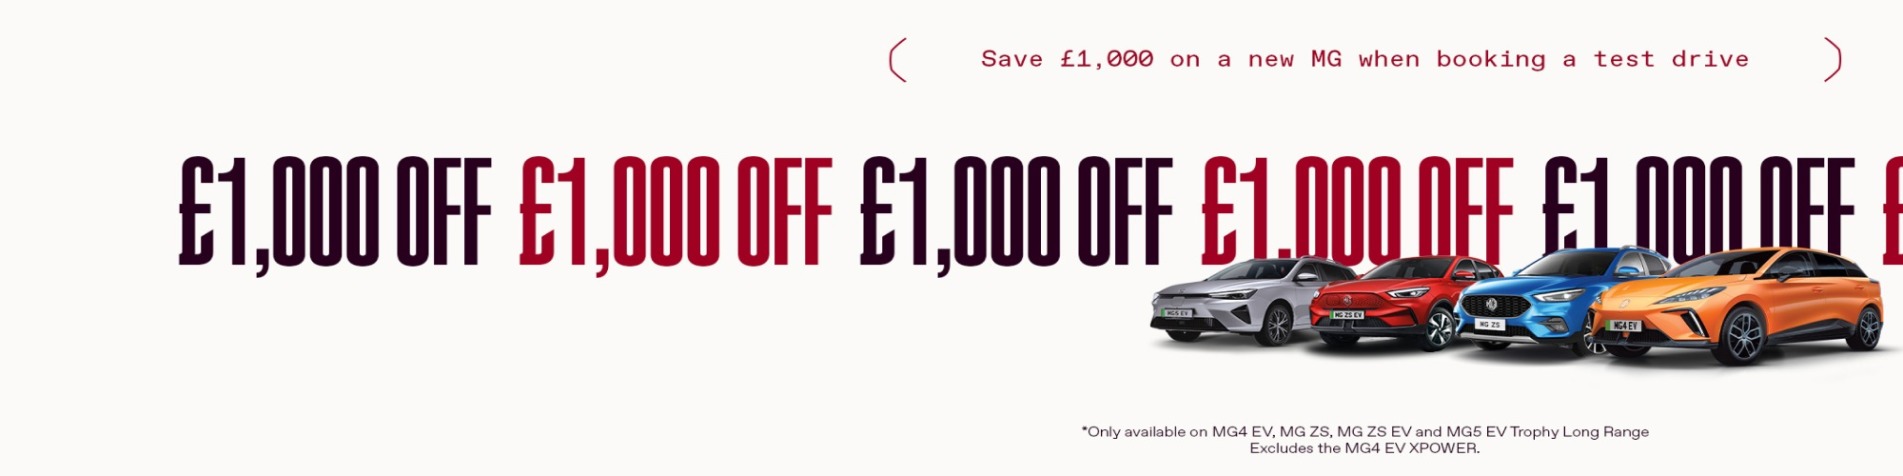 £1000 off when booking test drive